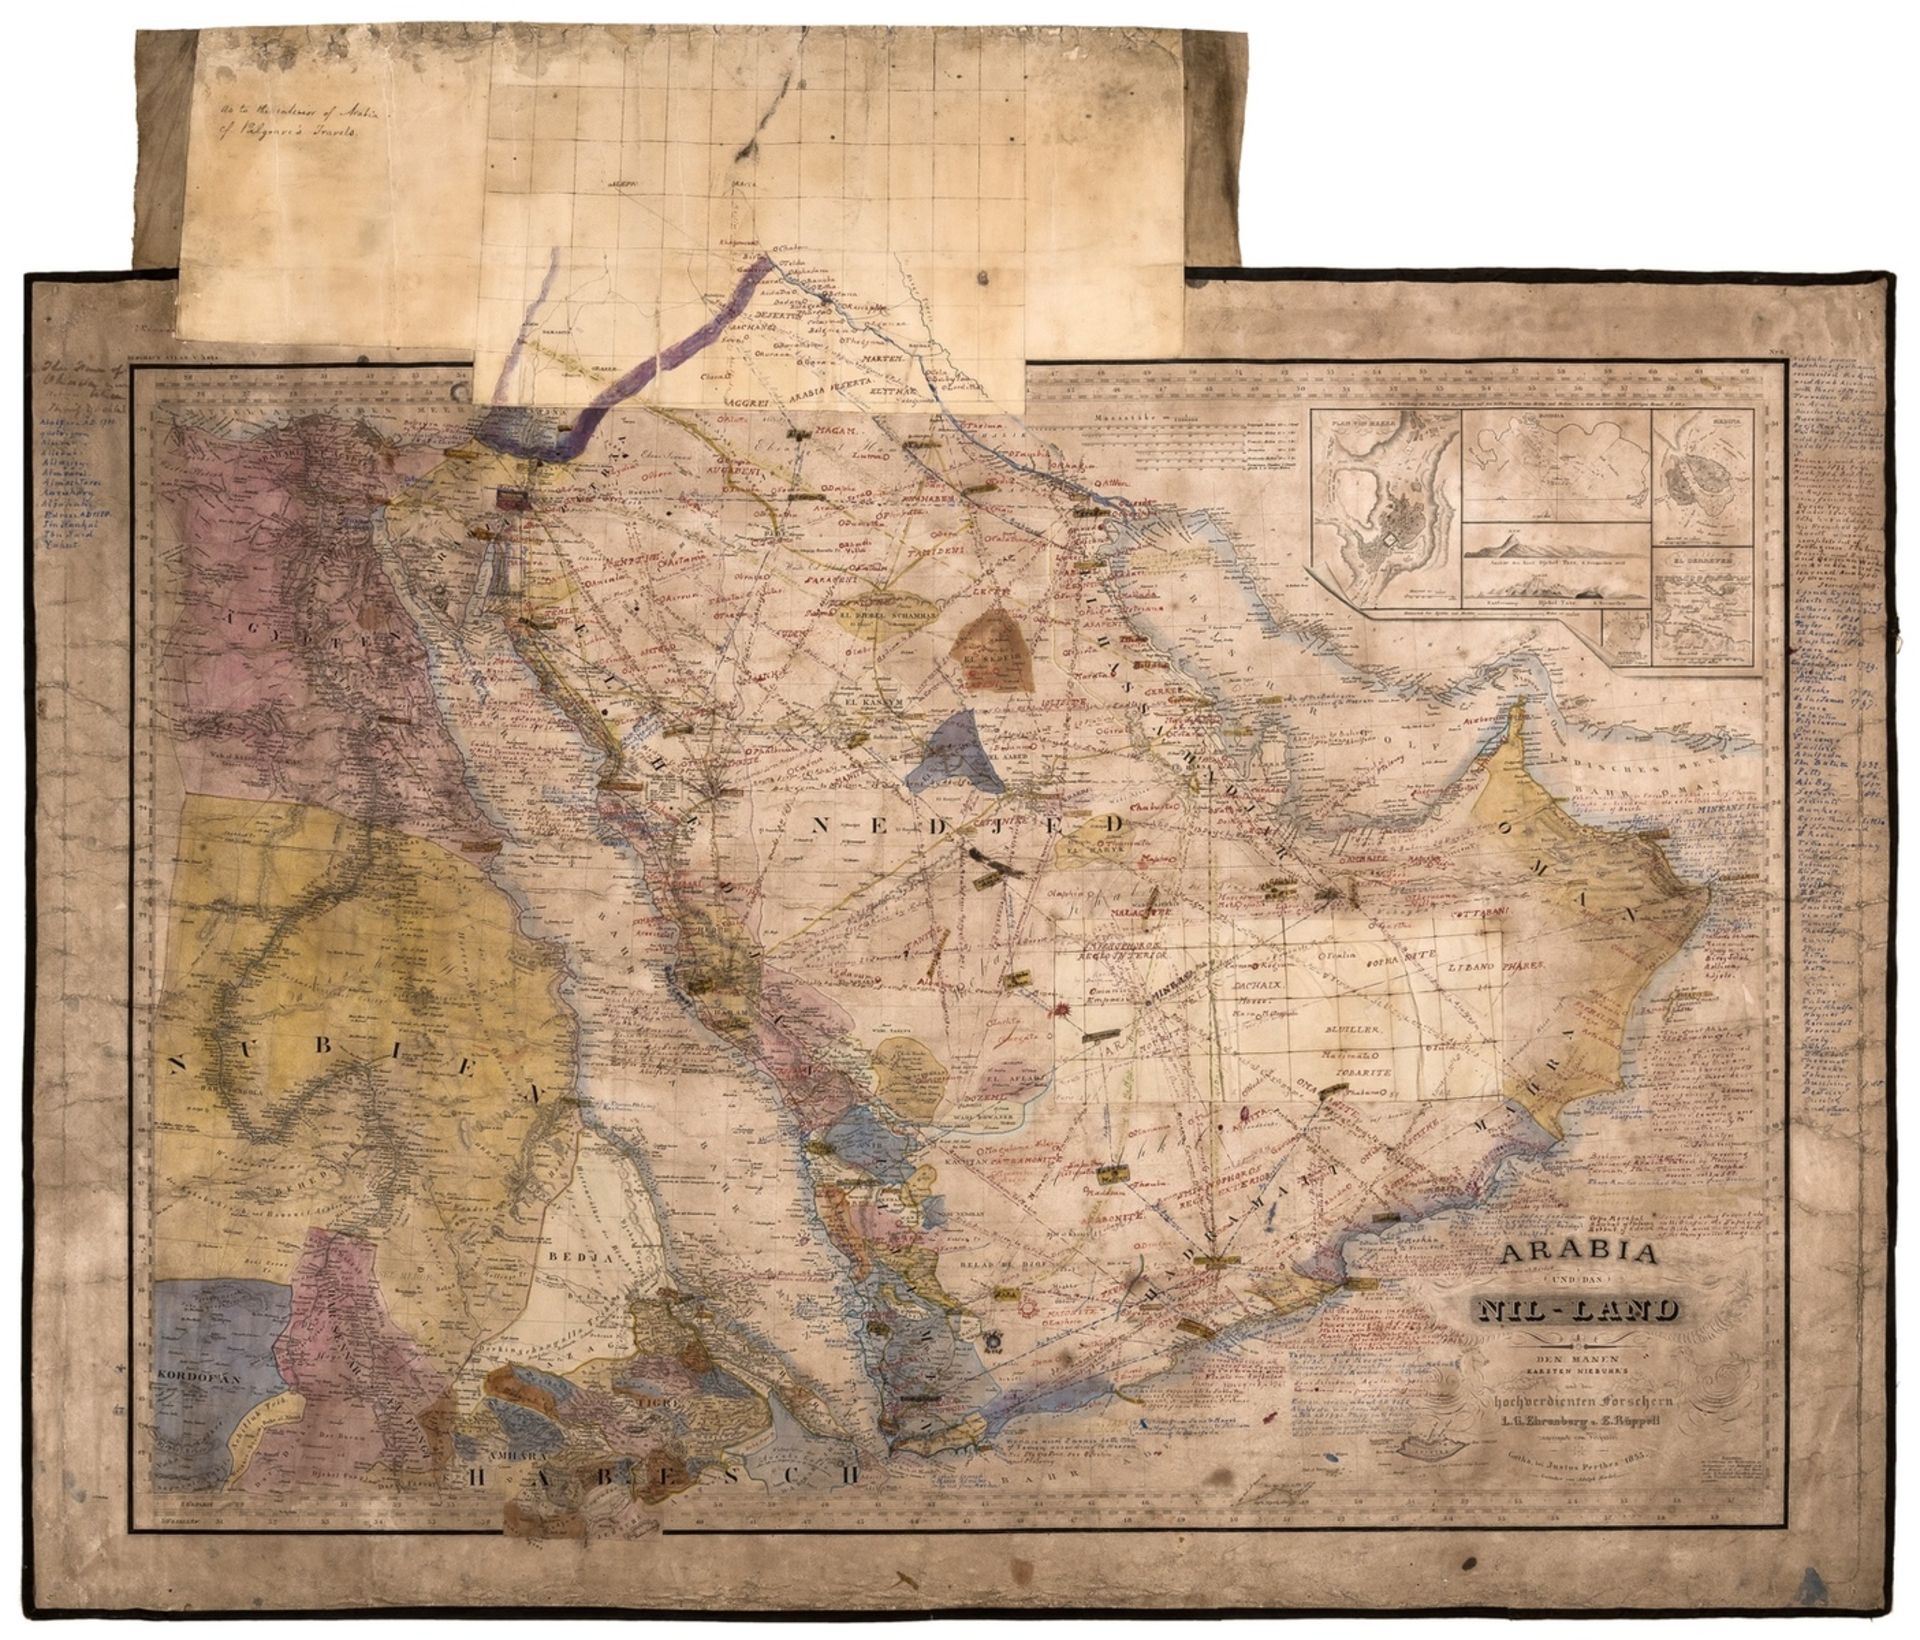 Middle East.- Ehrenberg (L.G.) and Eduard Rüppell. Arabia und das Nil-Land [with extensive …